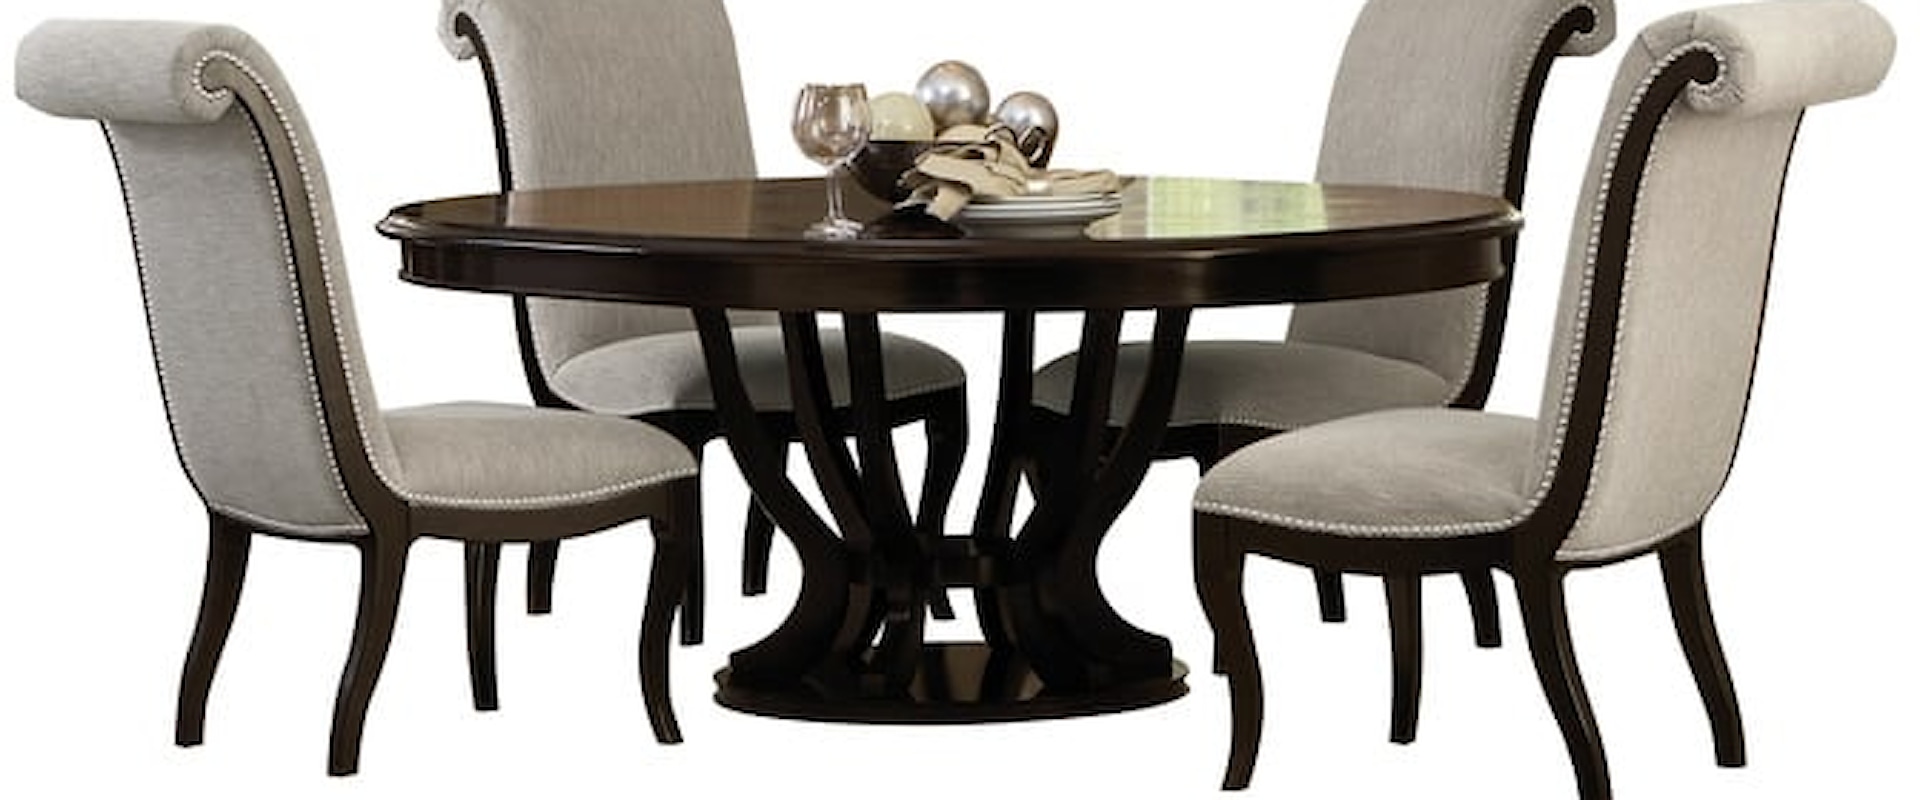 Transitional 5-Piece Dining Set with Nailhead Trim